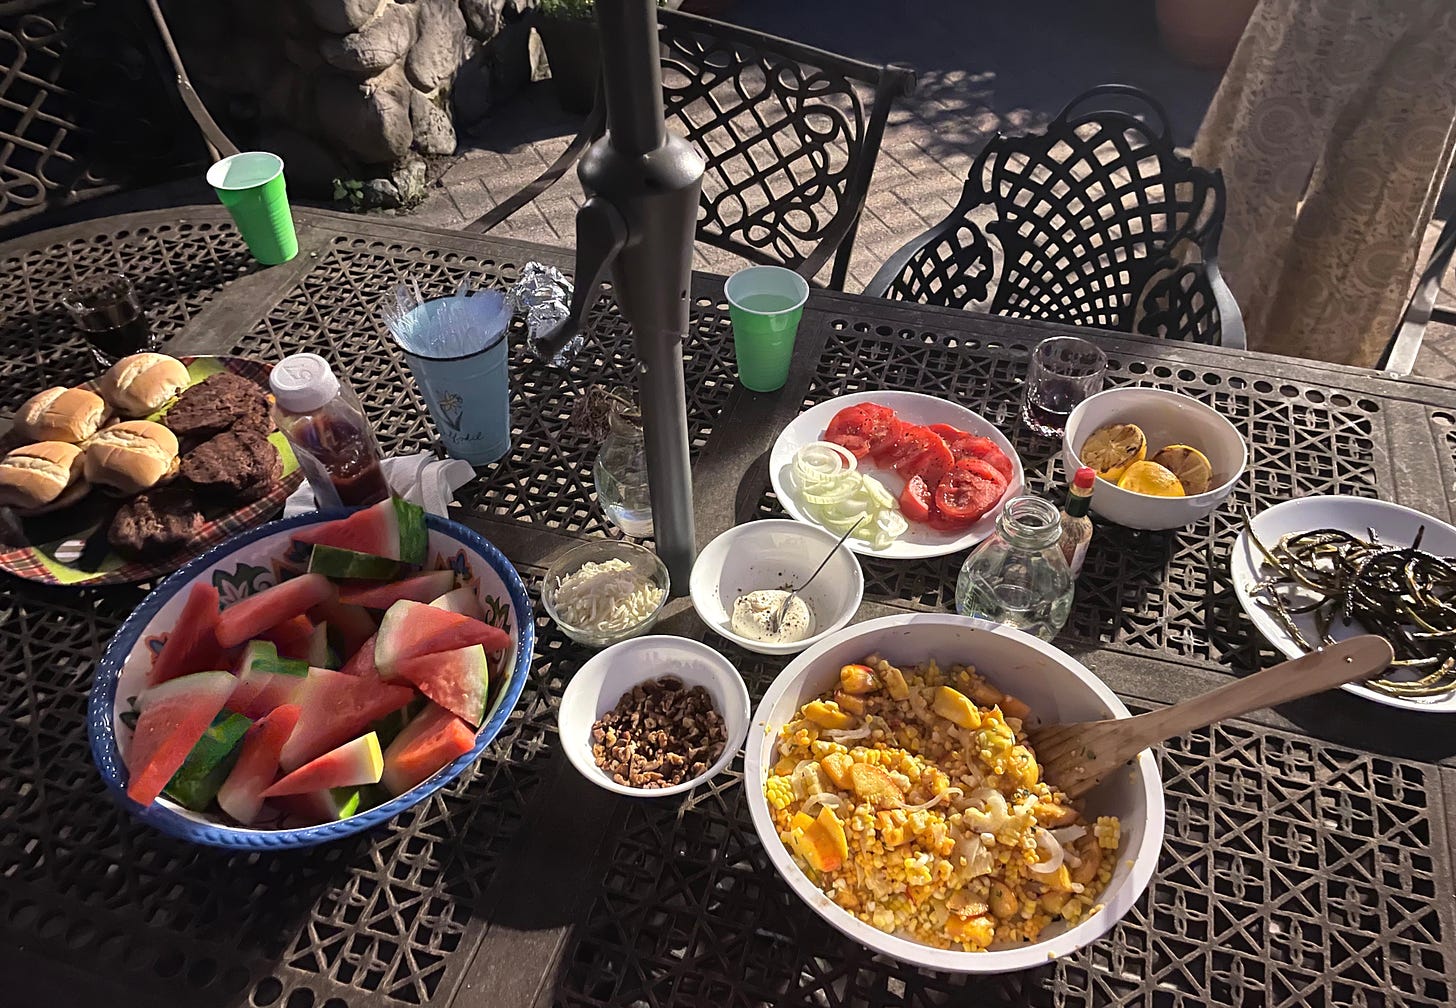 table with impossible burgers, watermelon, peach and corn salad, garlic scapes, grilled lemons, and sides of toasted walnuts, burrata, and tomato and onion slices